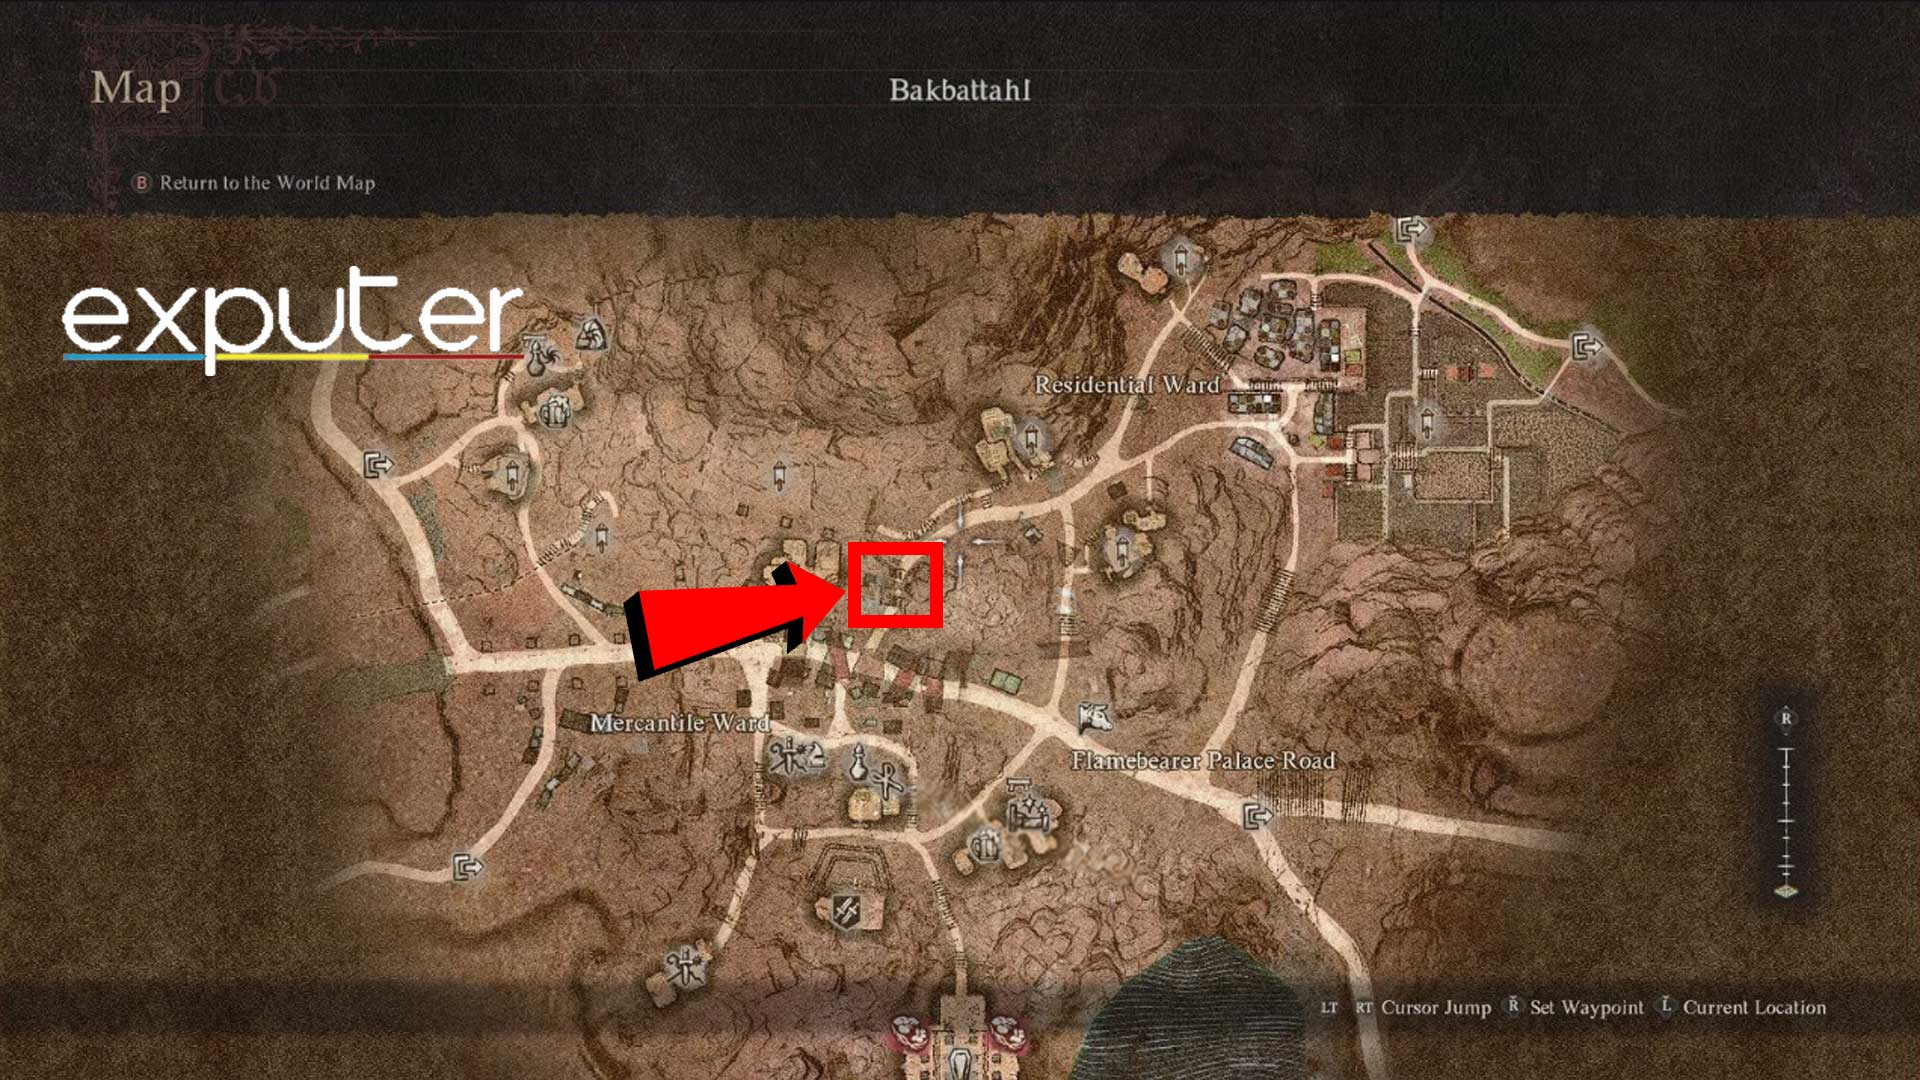 Adrea's location on the Bakbattahl map. (image captured by eXputer)